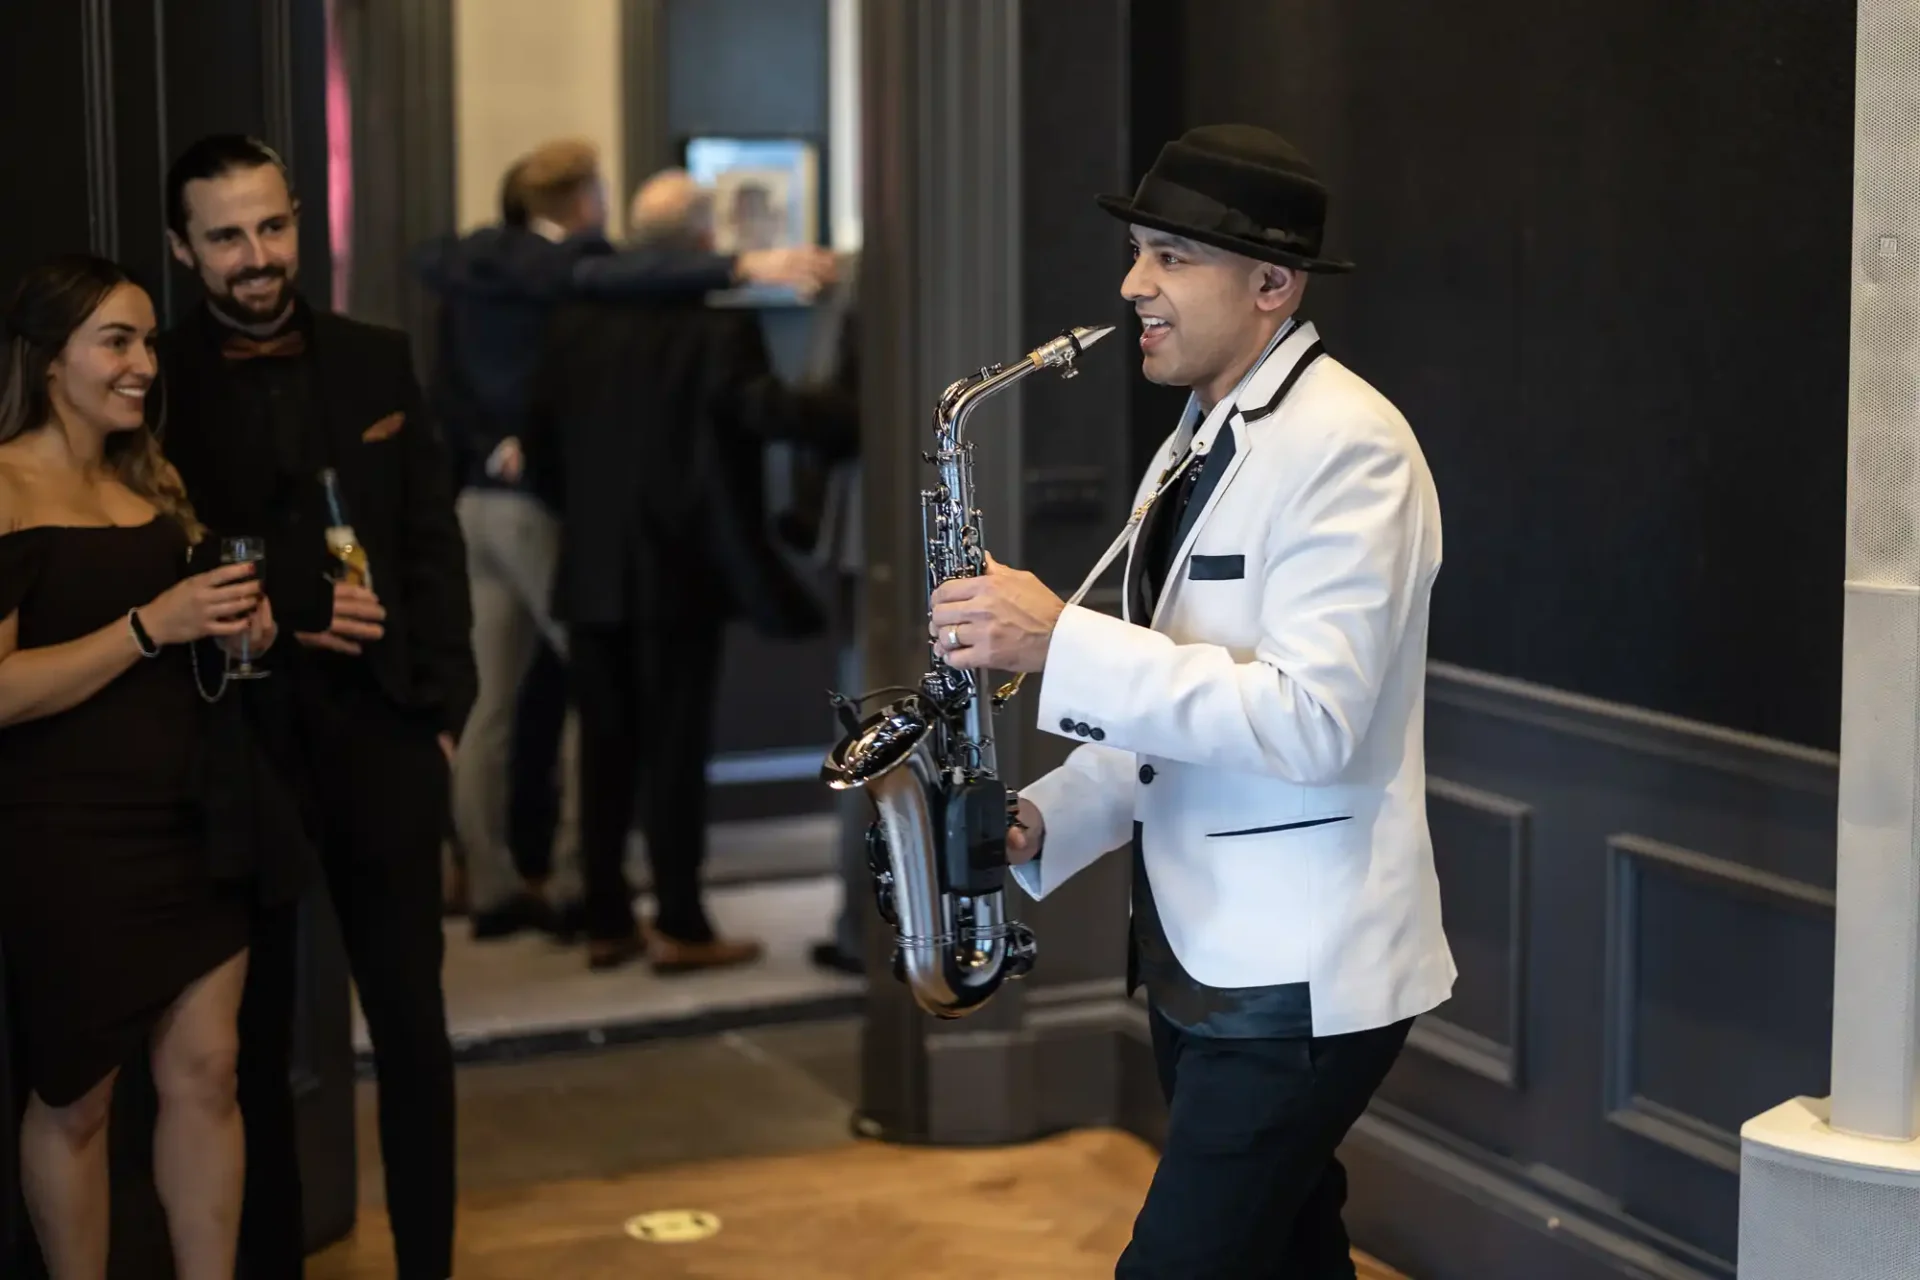 A man in a white jacket and hat plays the saxophone at an indoor event, with a couple holding drinks in the background.